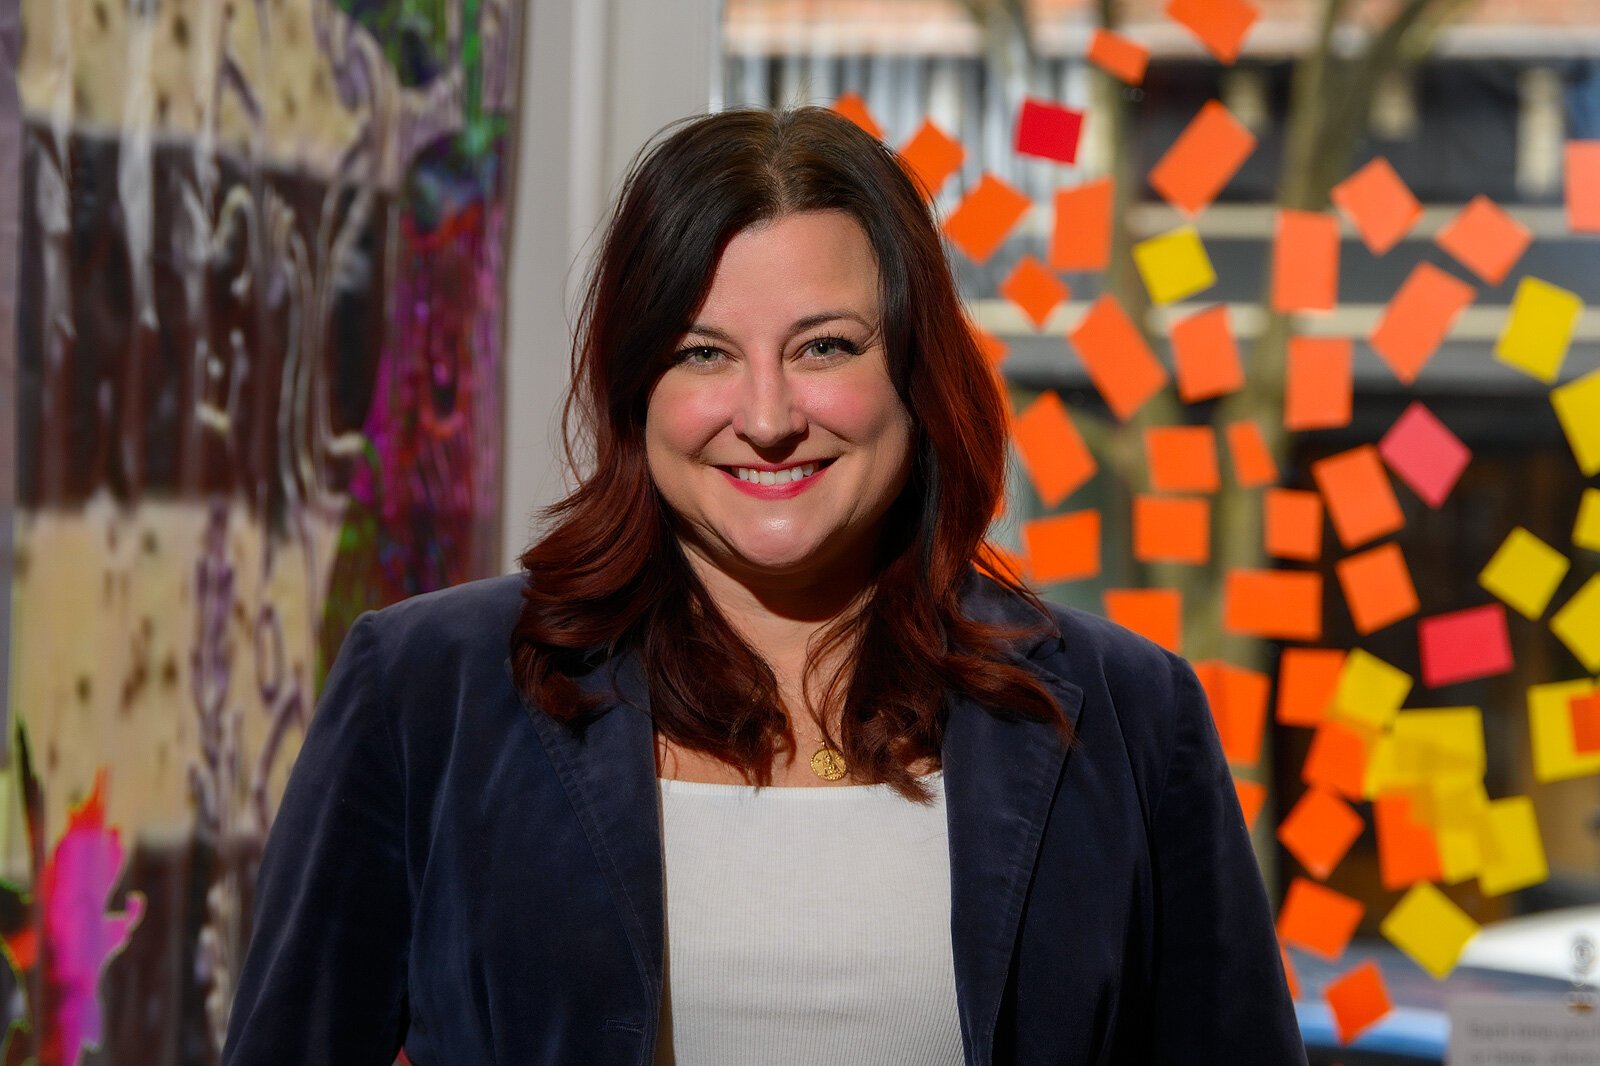 Q&A: New Ann Arbor Art Center executive director outlines inclusive vision for creative community